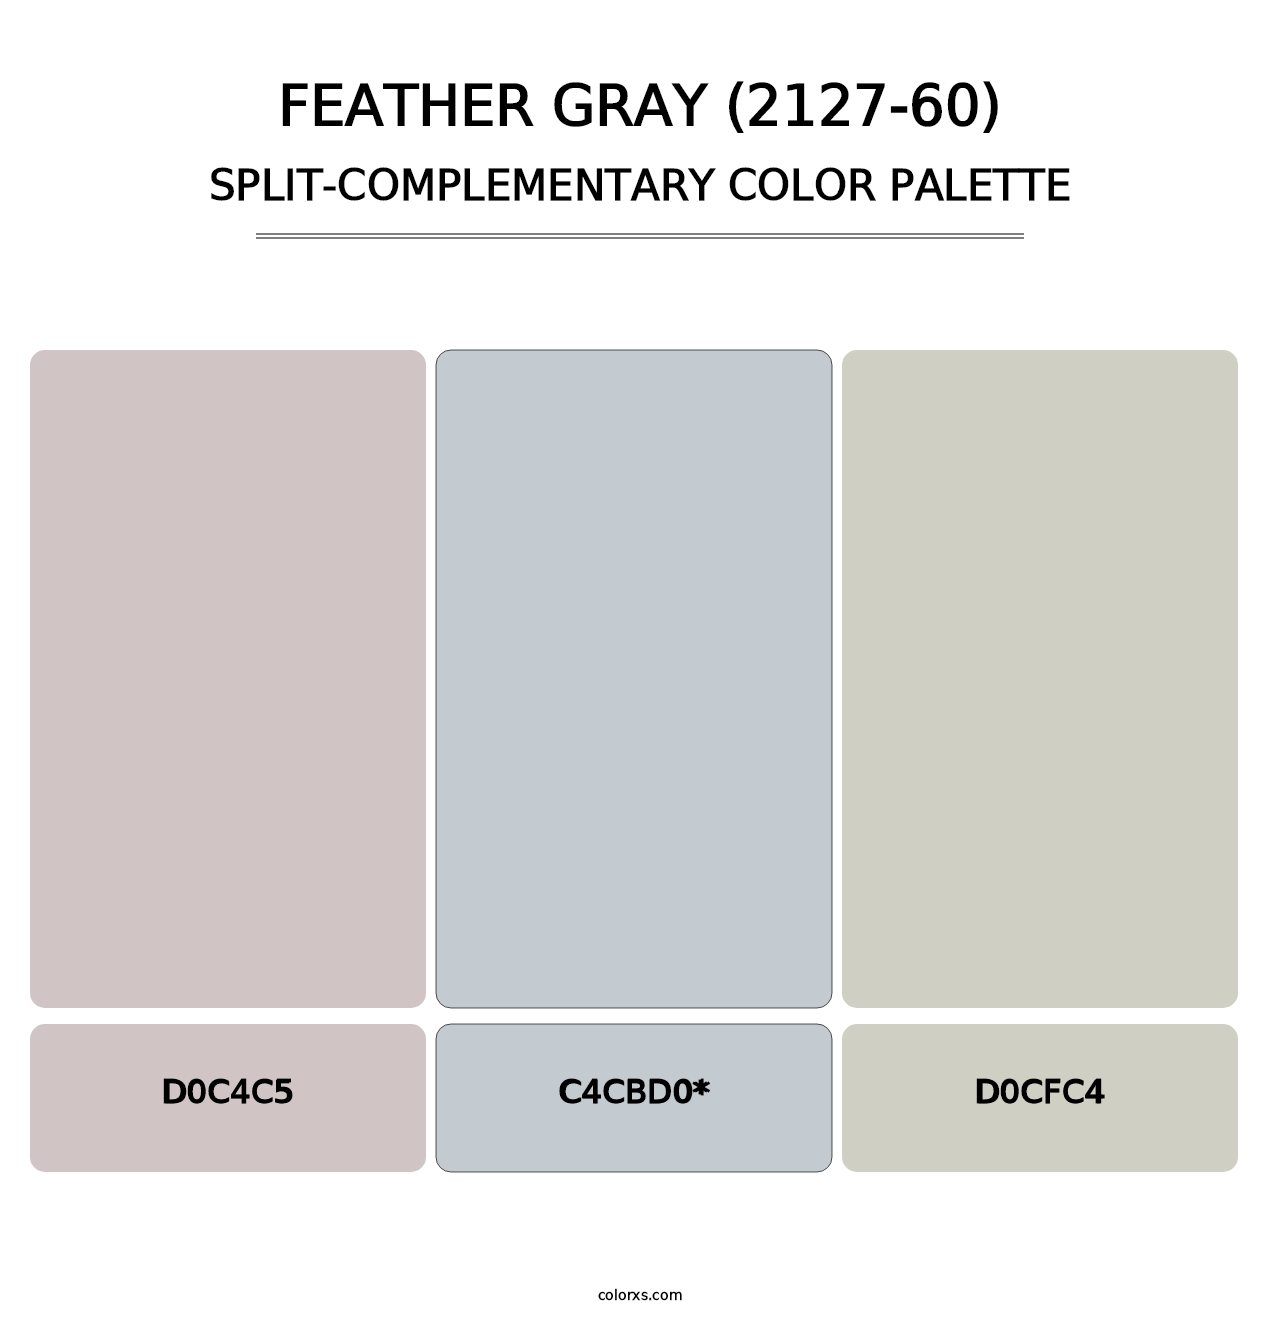 Feather Gray (2127-60) - Split-Complementary Color Palette